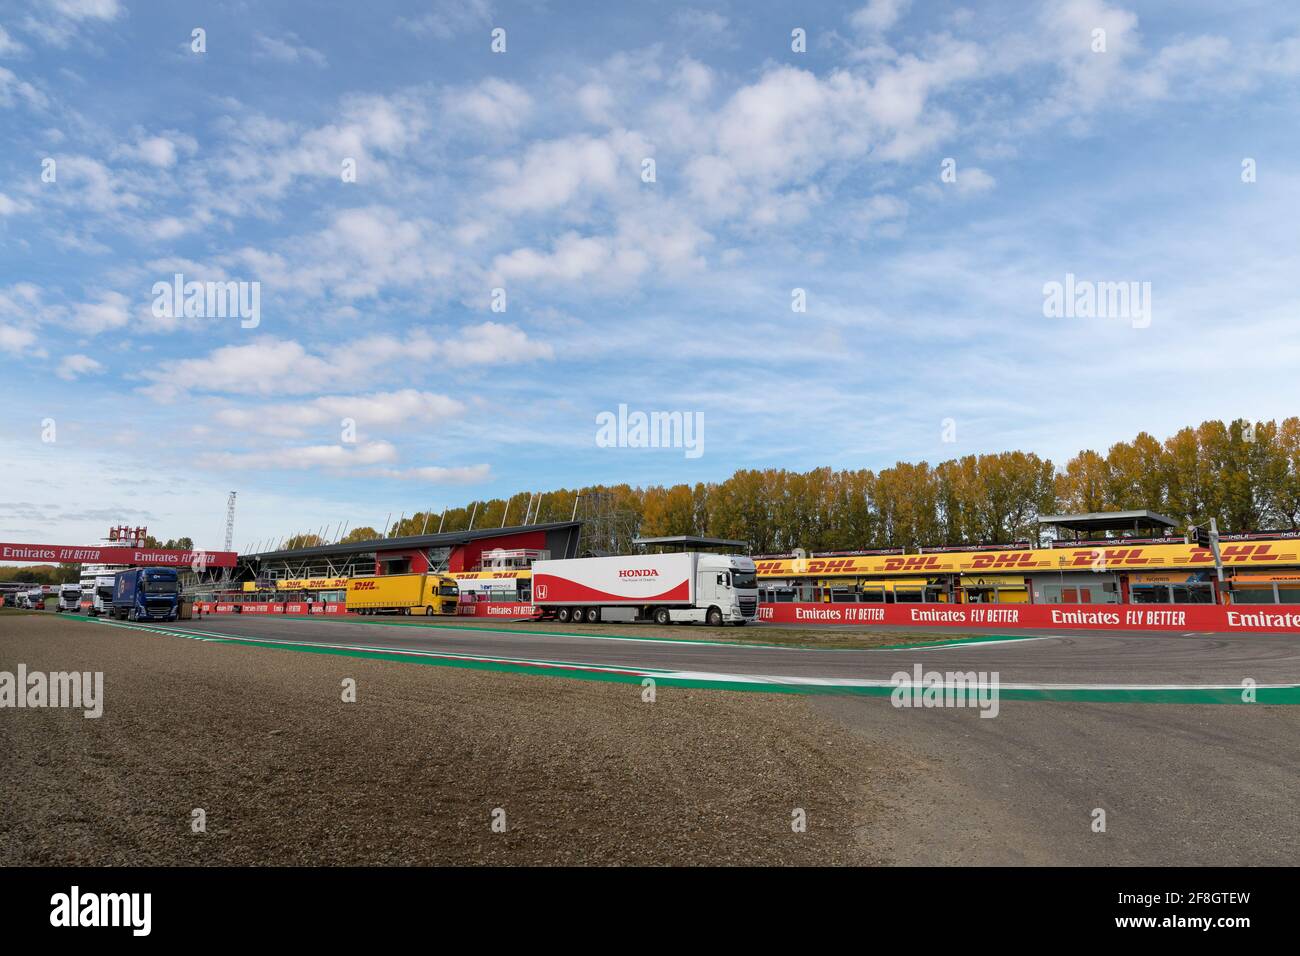 Imola, Emilia Romagna, Italy:Enzo and Dino Ferrari racetrack before 2020 Formula One (F1) world championship. View with trucks. racing brands and logo Stock Photo